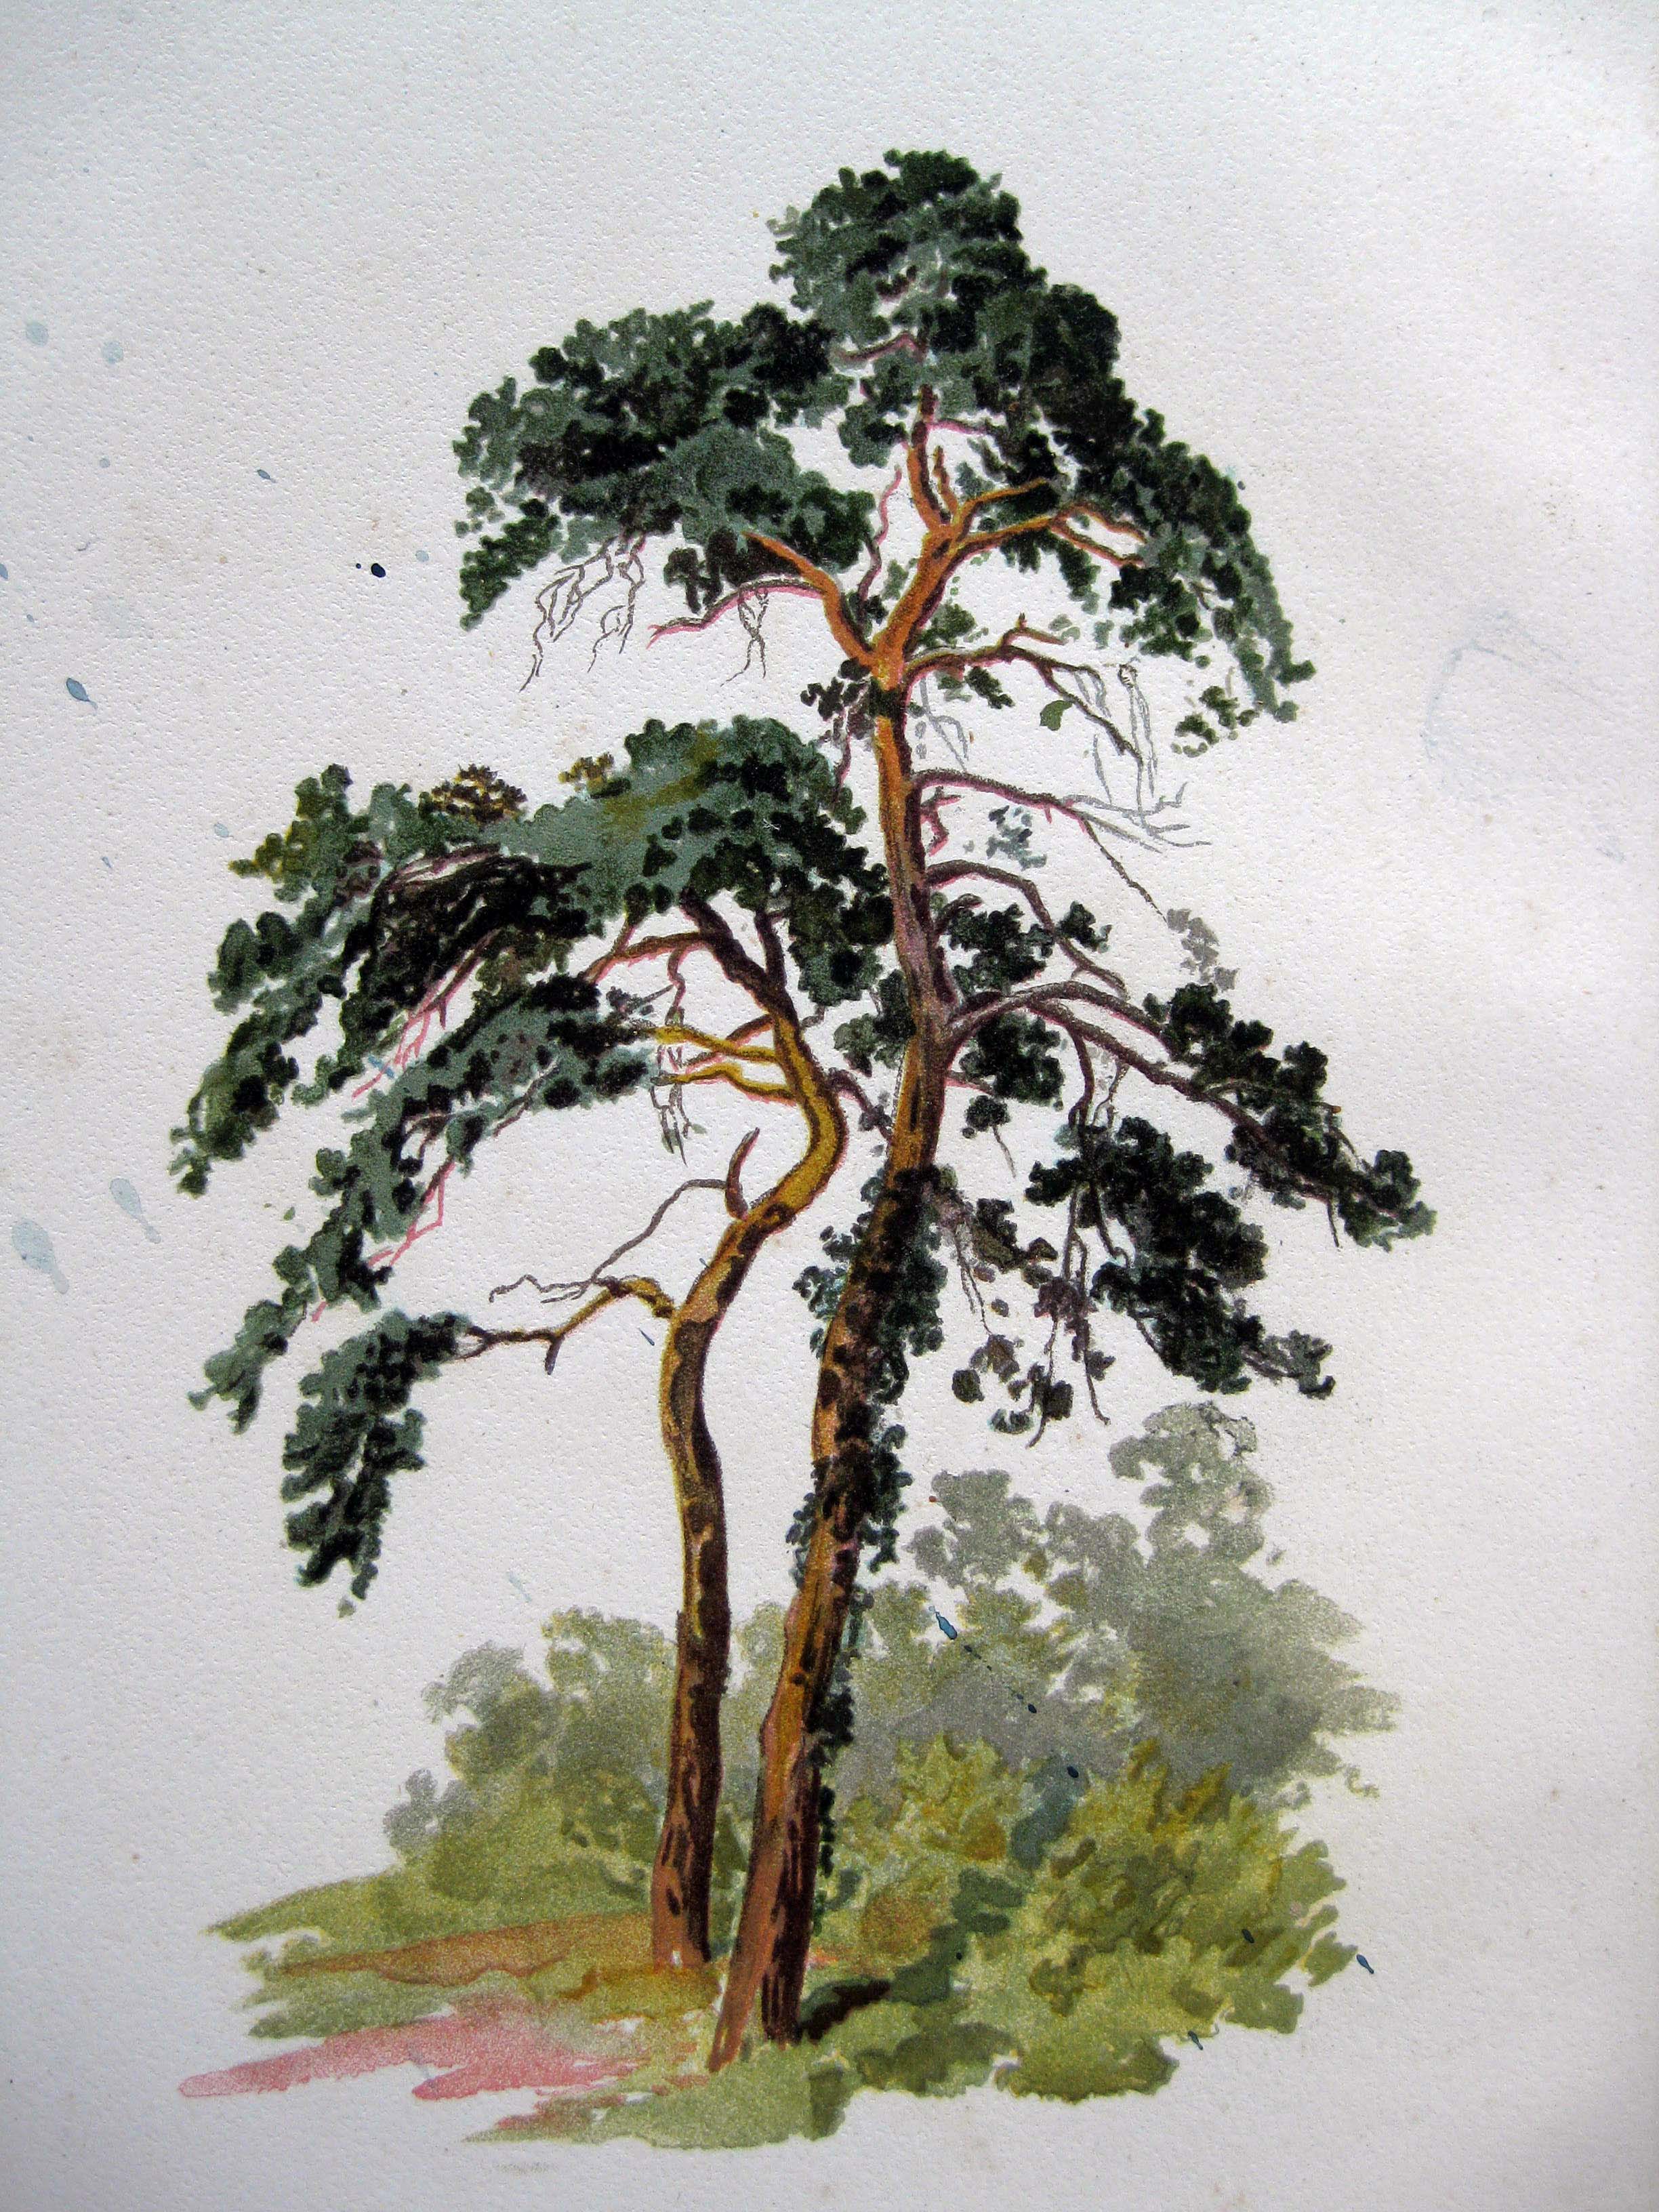 painting trees | Old books